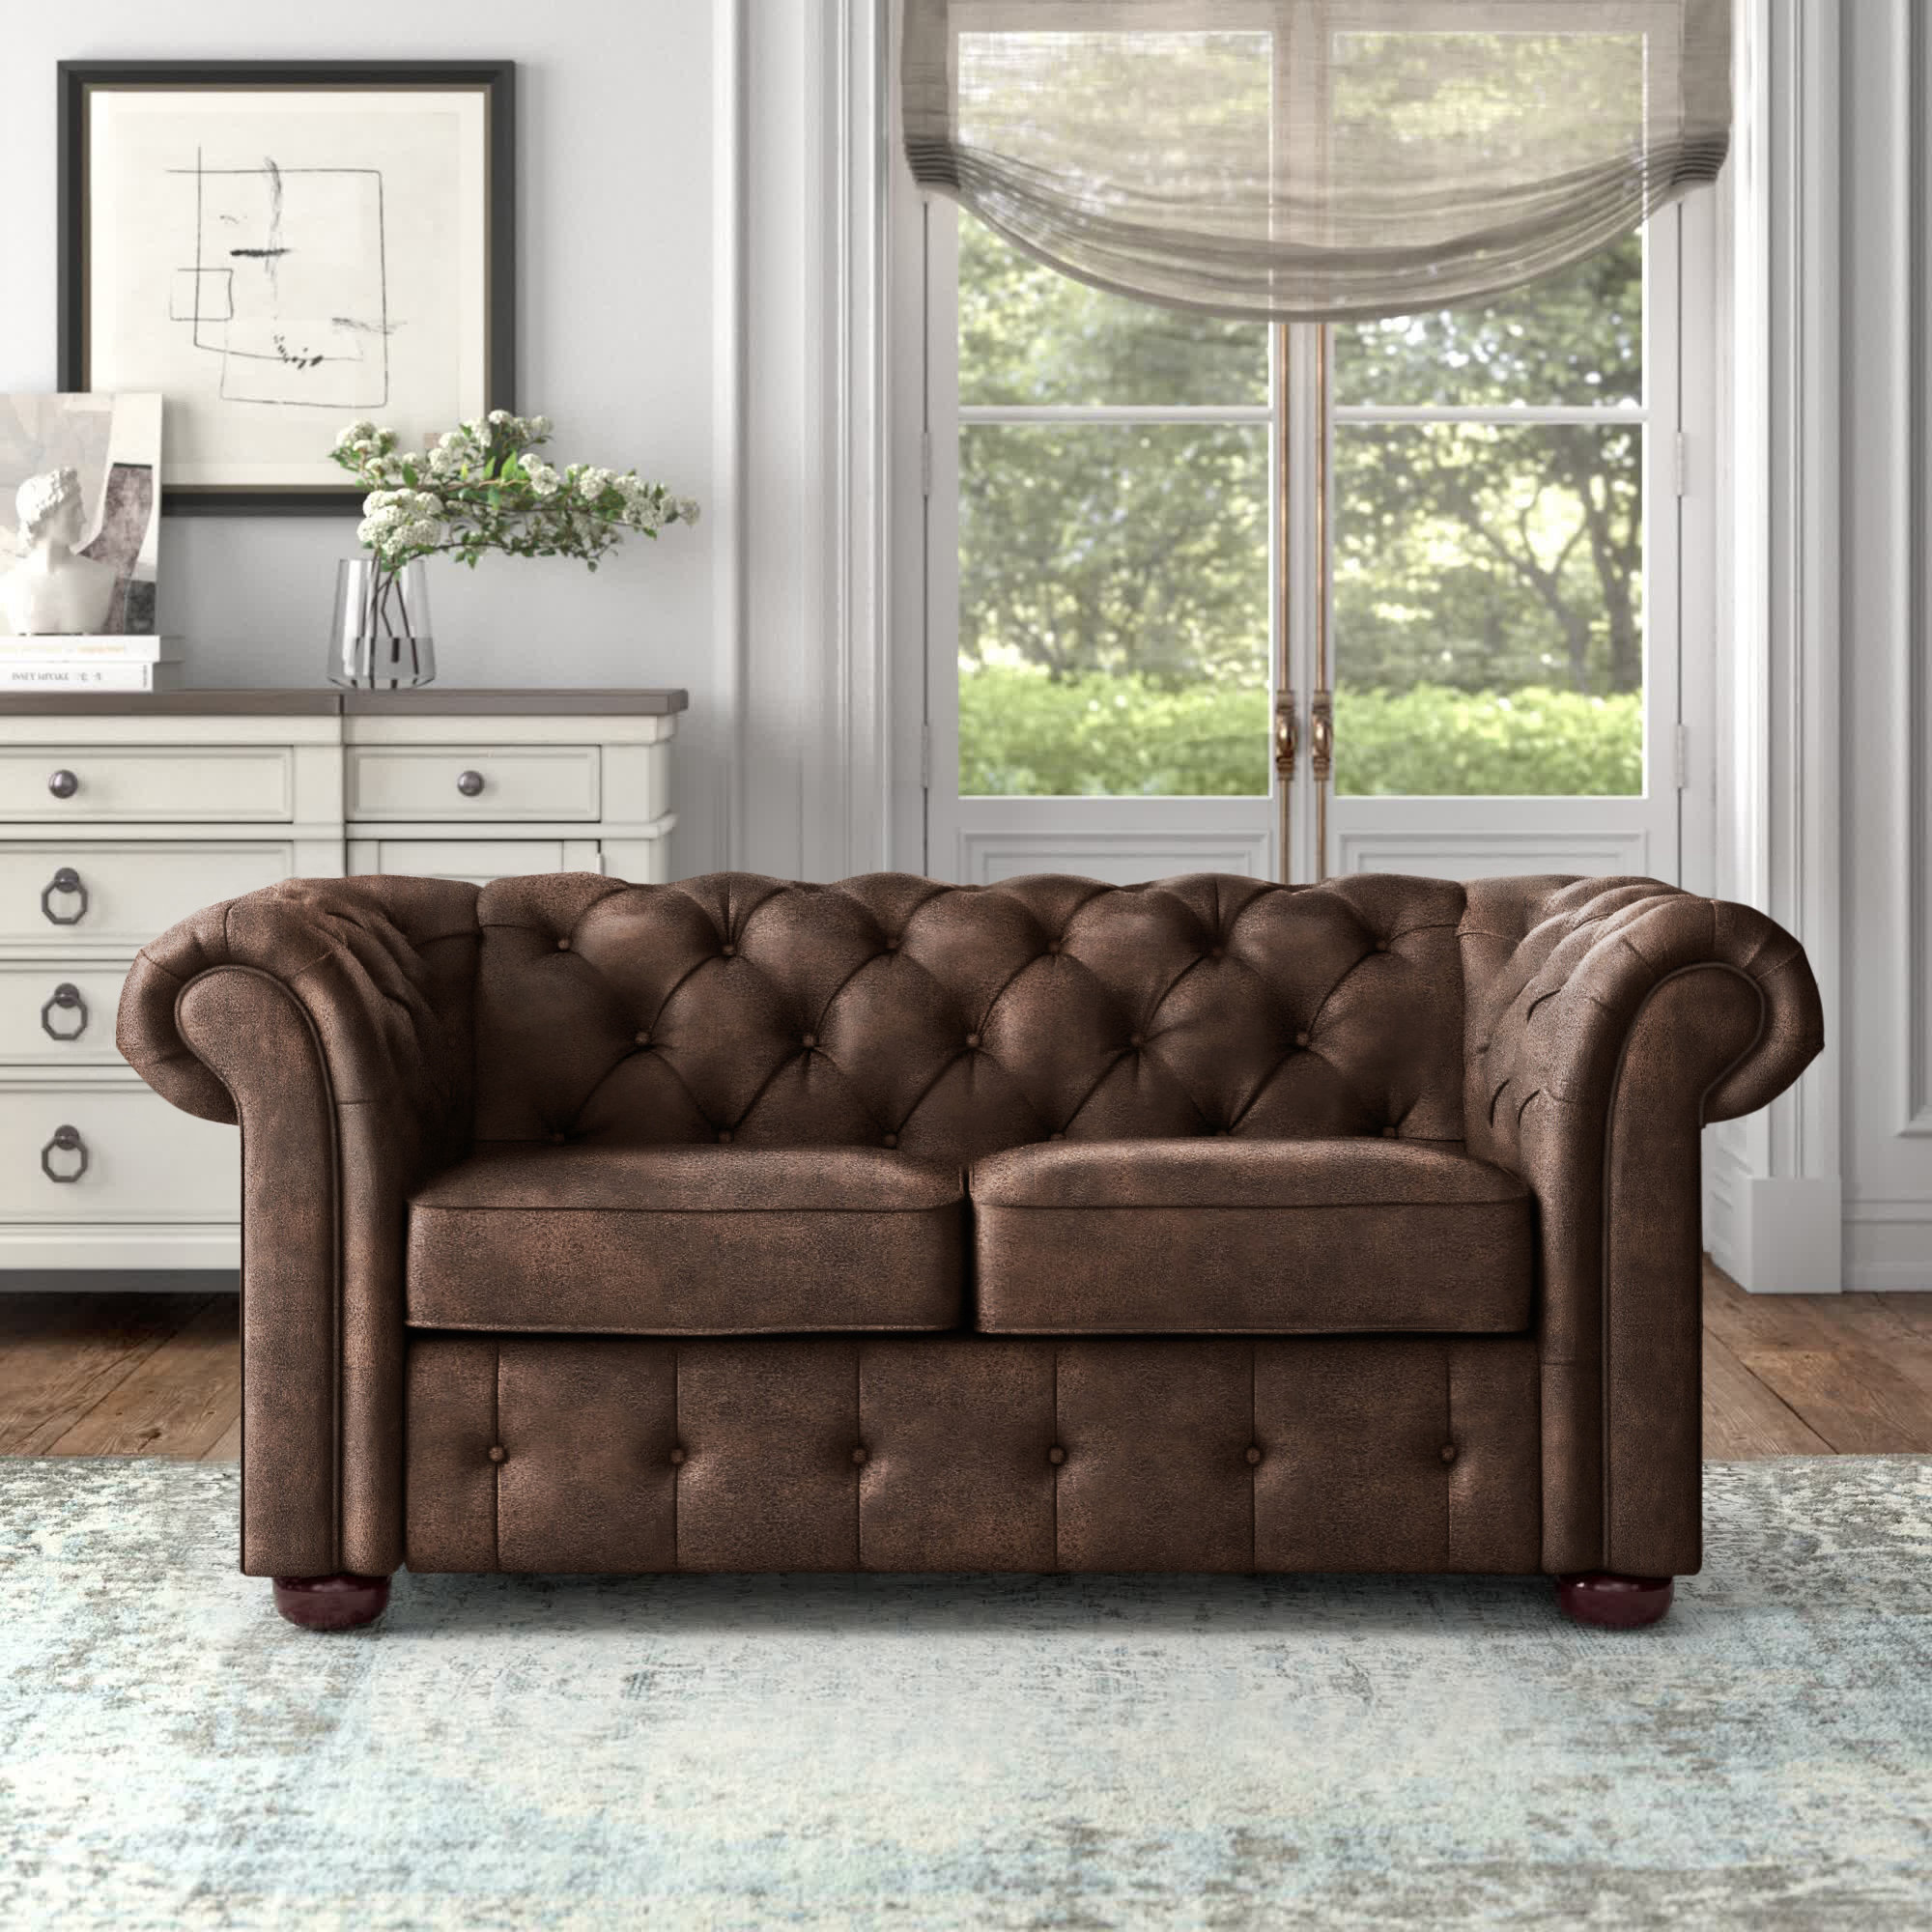 Acklen 68.4” Rolled Arm Chesterfield Loveseat with Reversible Cushions